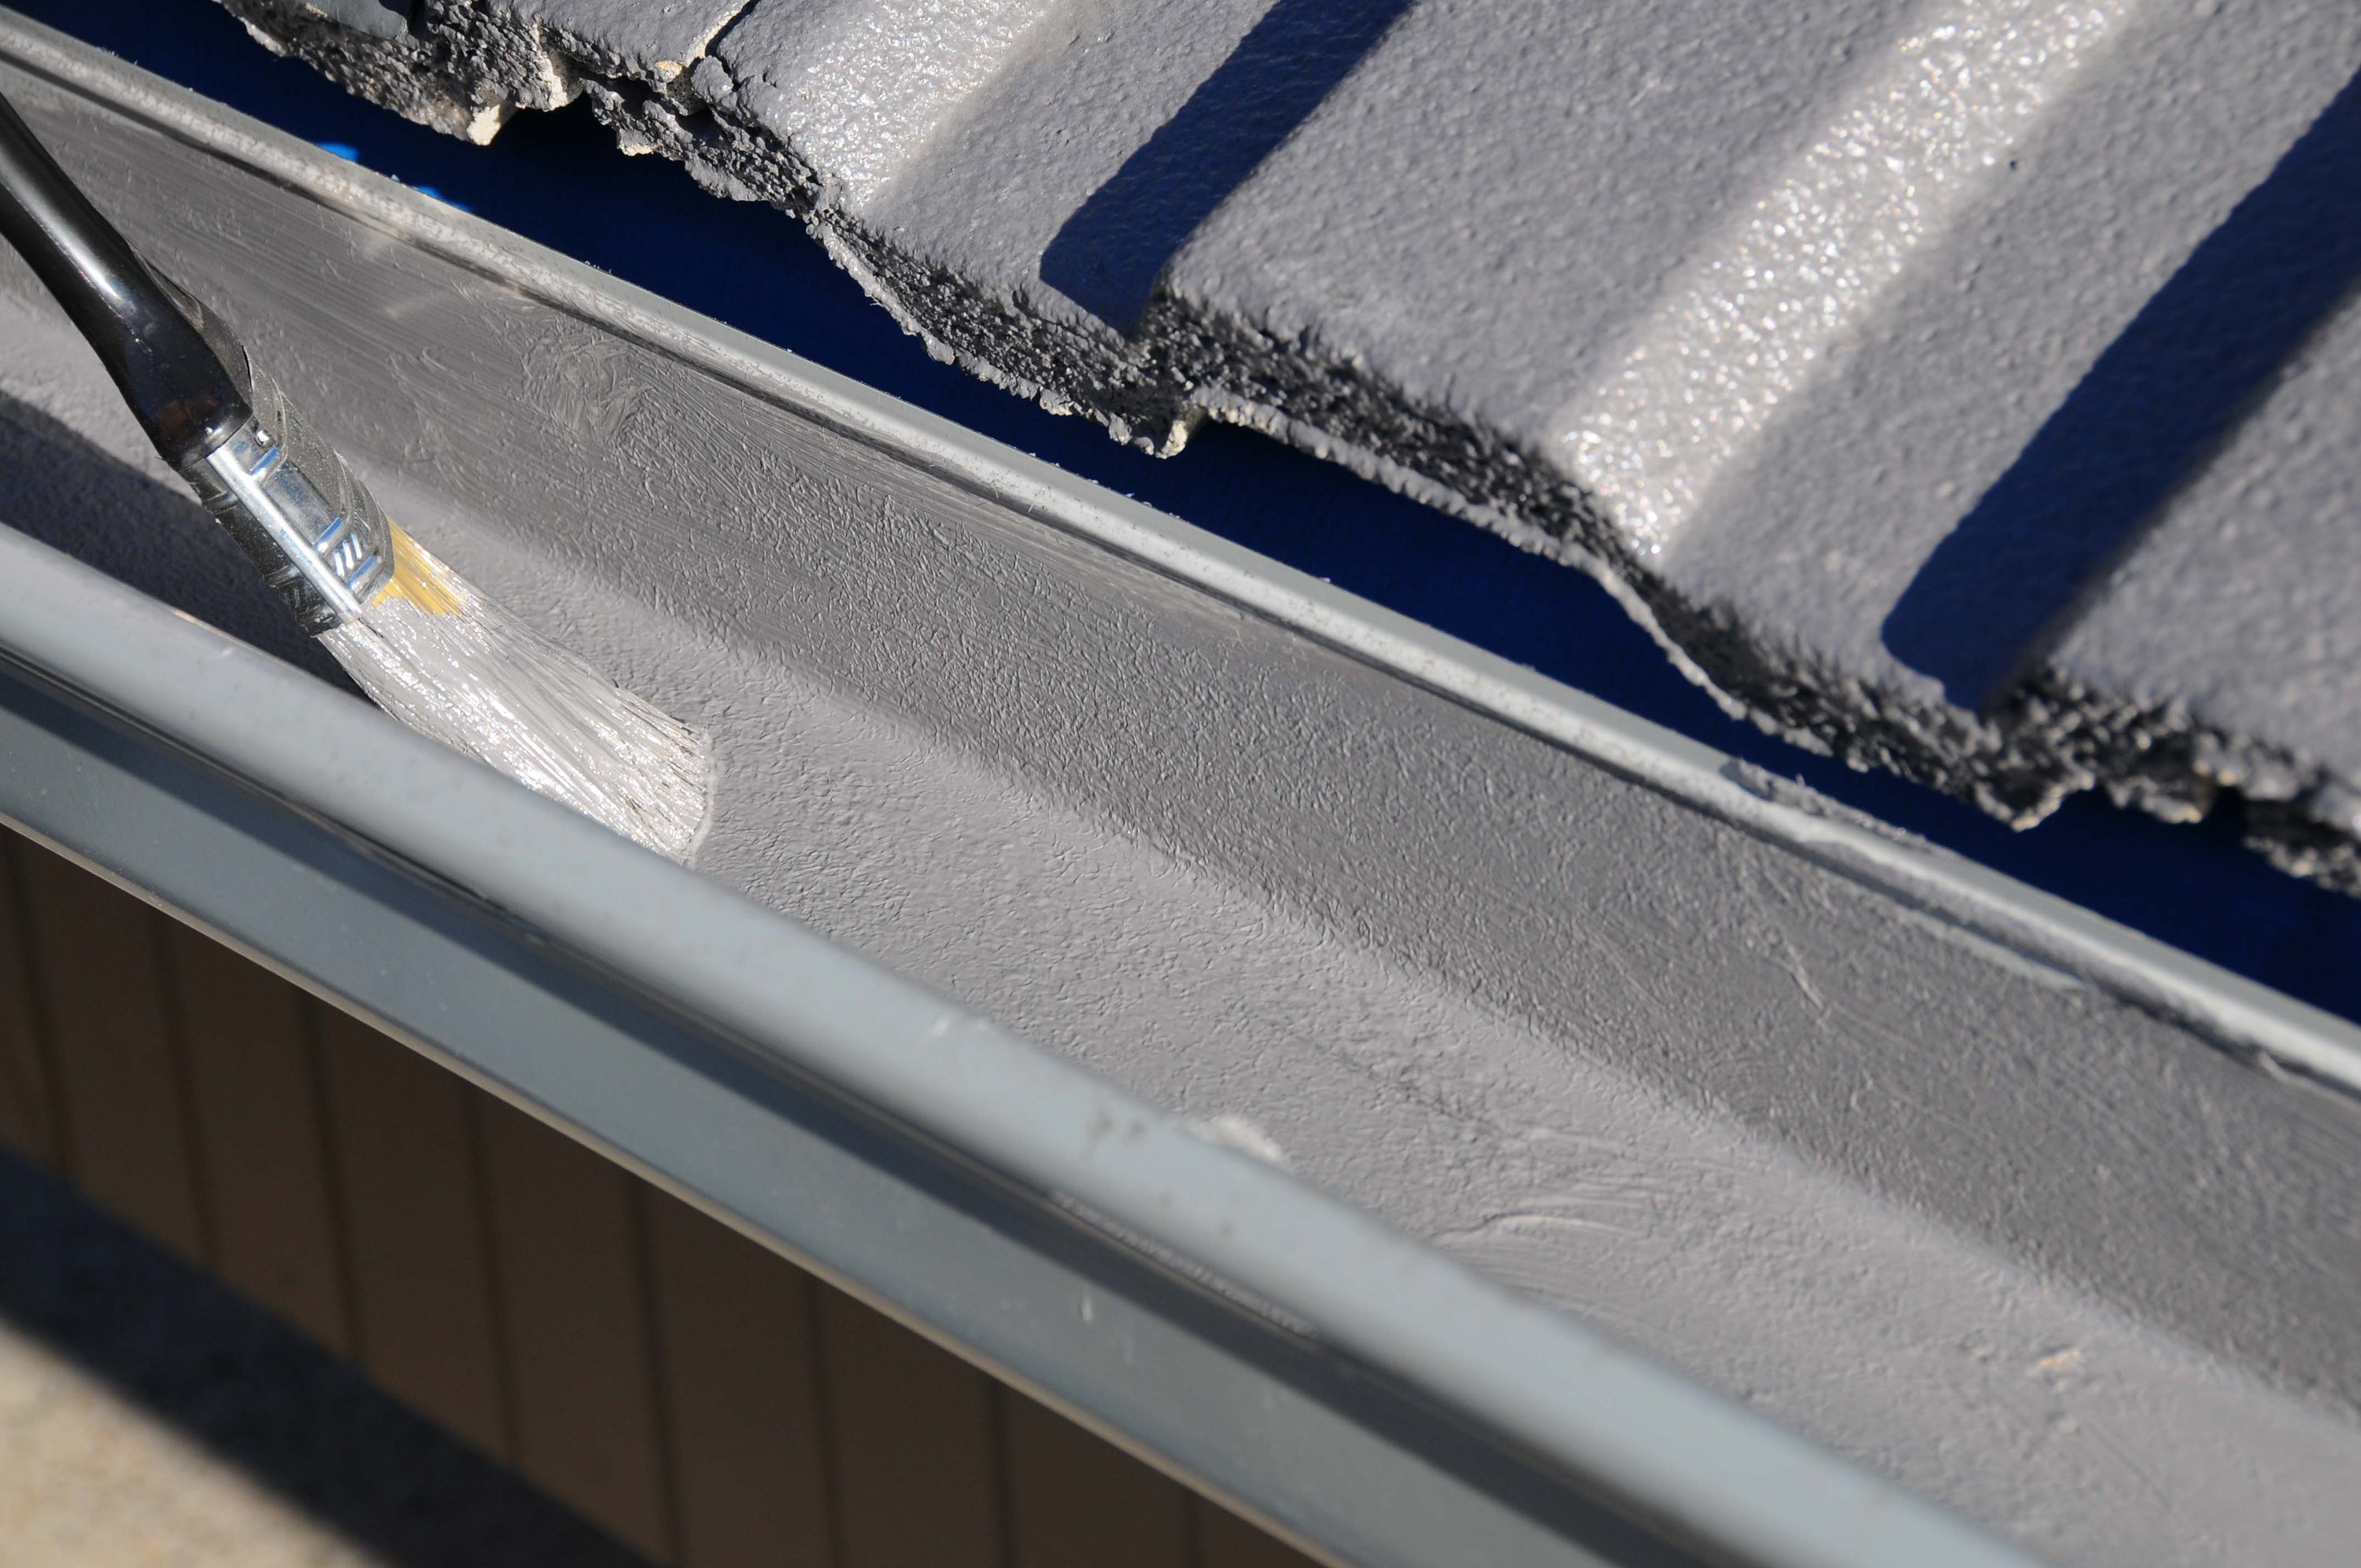 Repairing Roof Leaks. The perfect and easy to use solution for roof repairs.